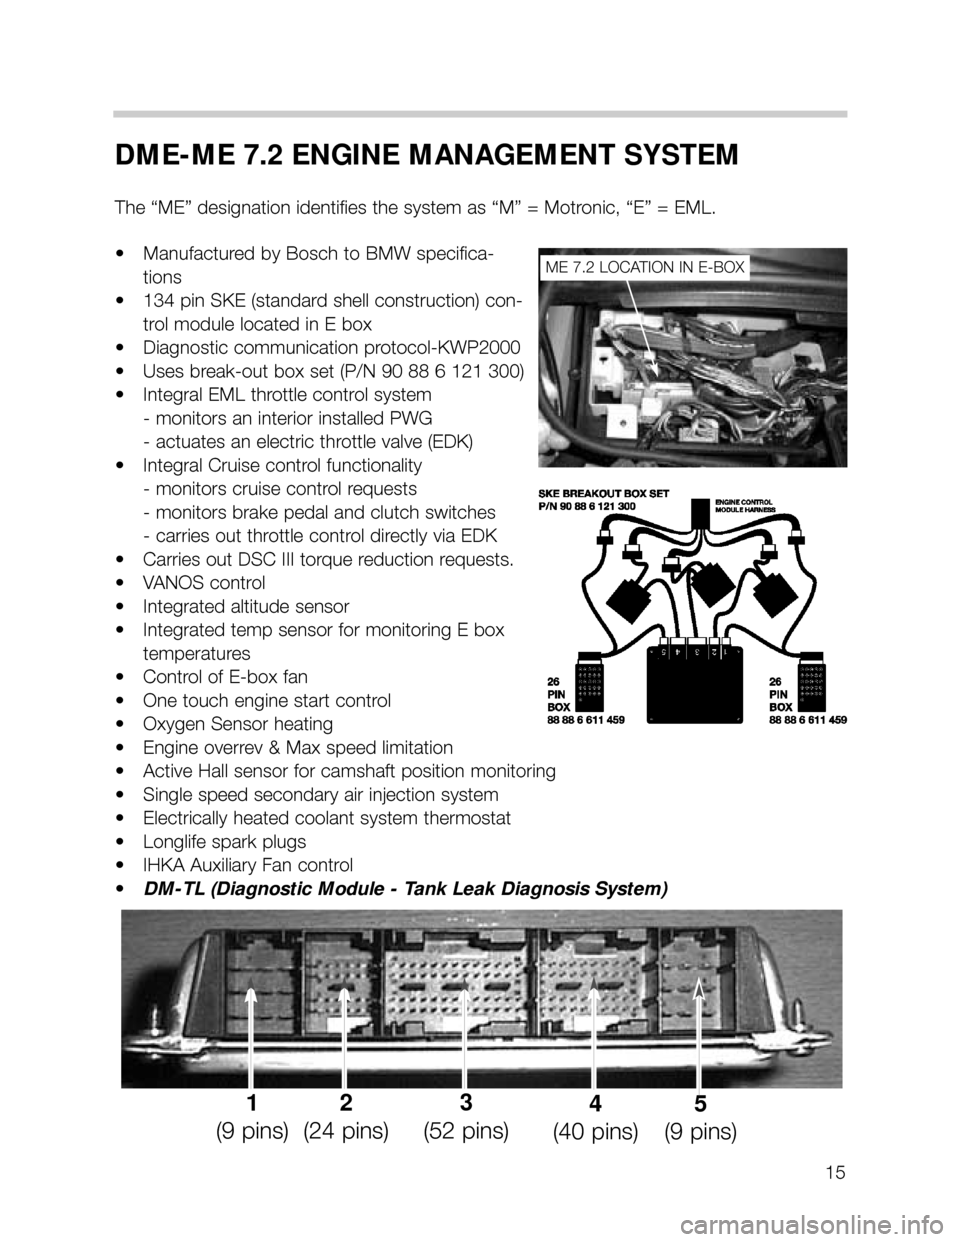 BMW 740i 2001 E38 M62TU Engine Workshop Manual 15
DME-ME 7.2 ENGINE MANAGEMENT SYSTEM
The “ME” designation identifies the system as “M” = Motronic, “E” = EML.
• Manufactured by Bosch to BMW specifica-
tions
• 134 pin SKE (standard 